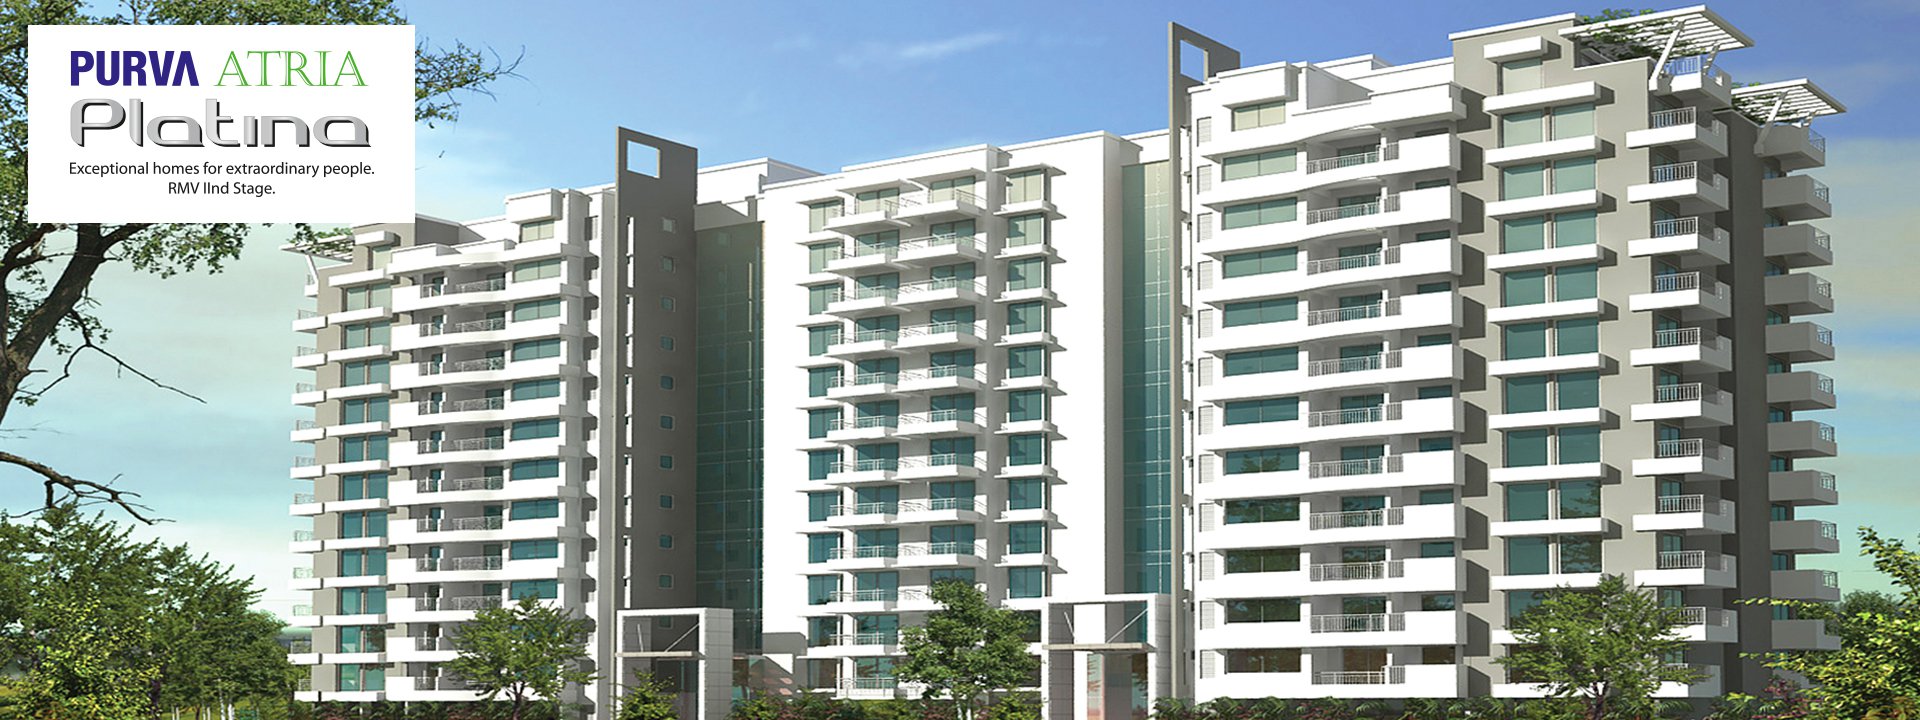 Purva Atria Platina is announced as a Gold Leed rated green building Update